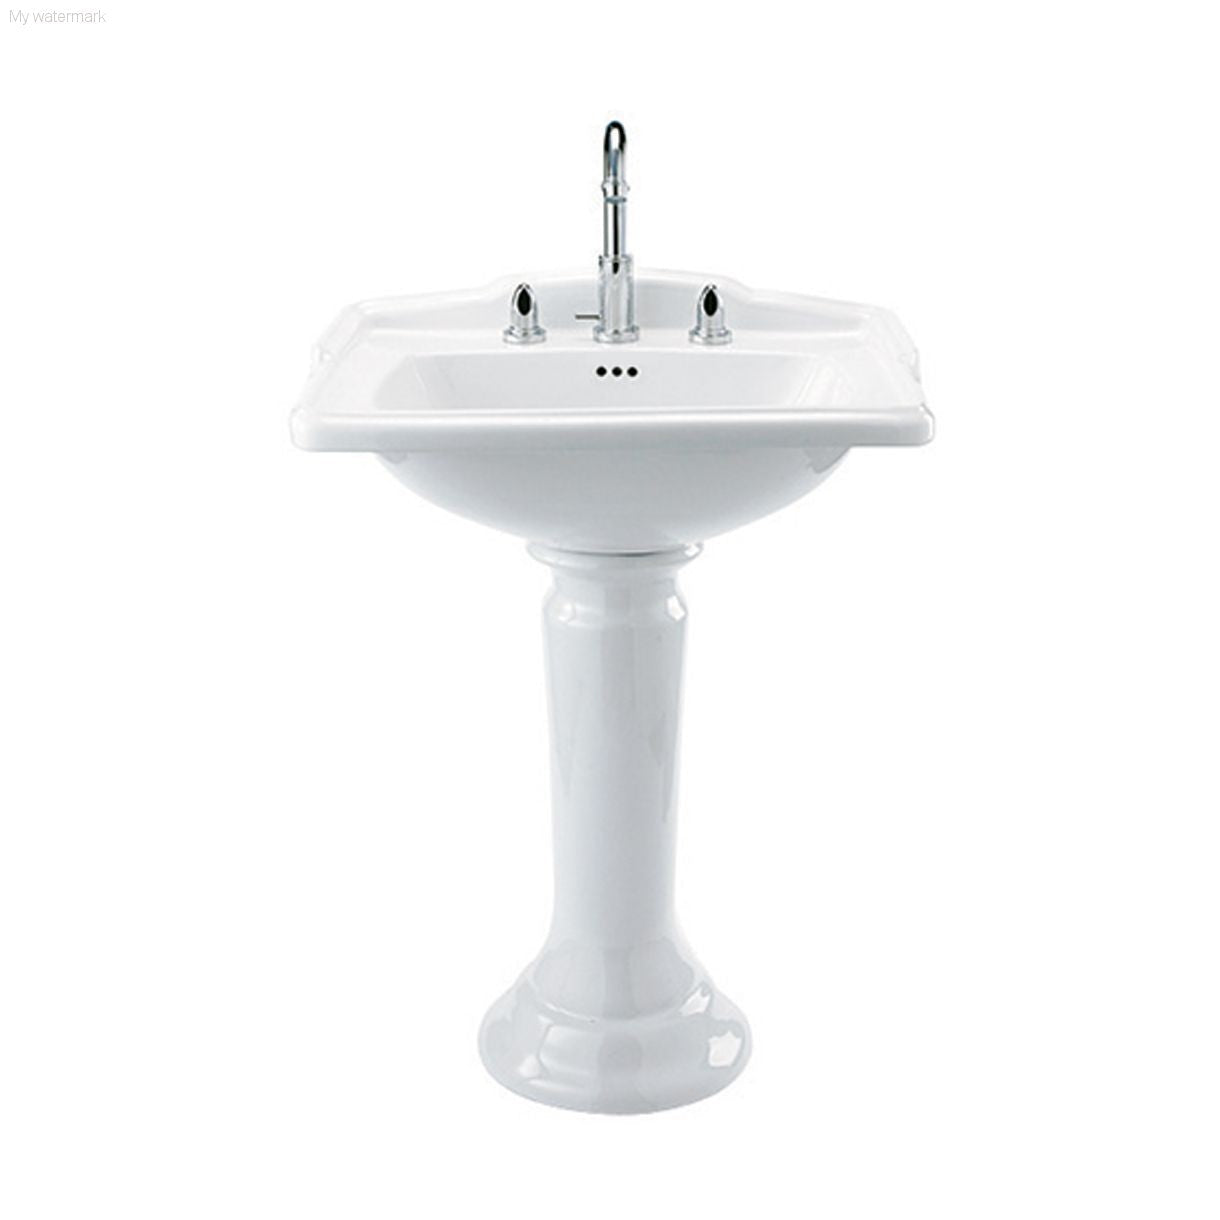 Birmingham 61 x 48 Vitreous China Wash Basin with Pedestal or Stand